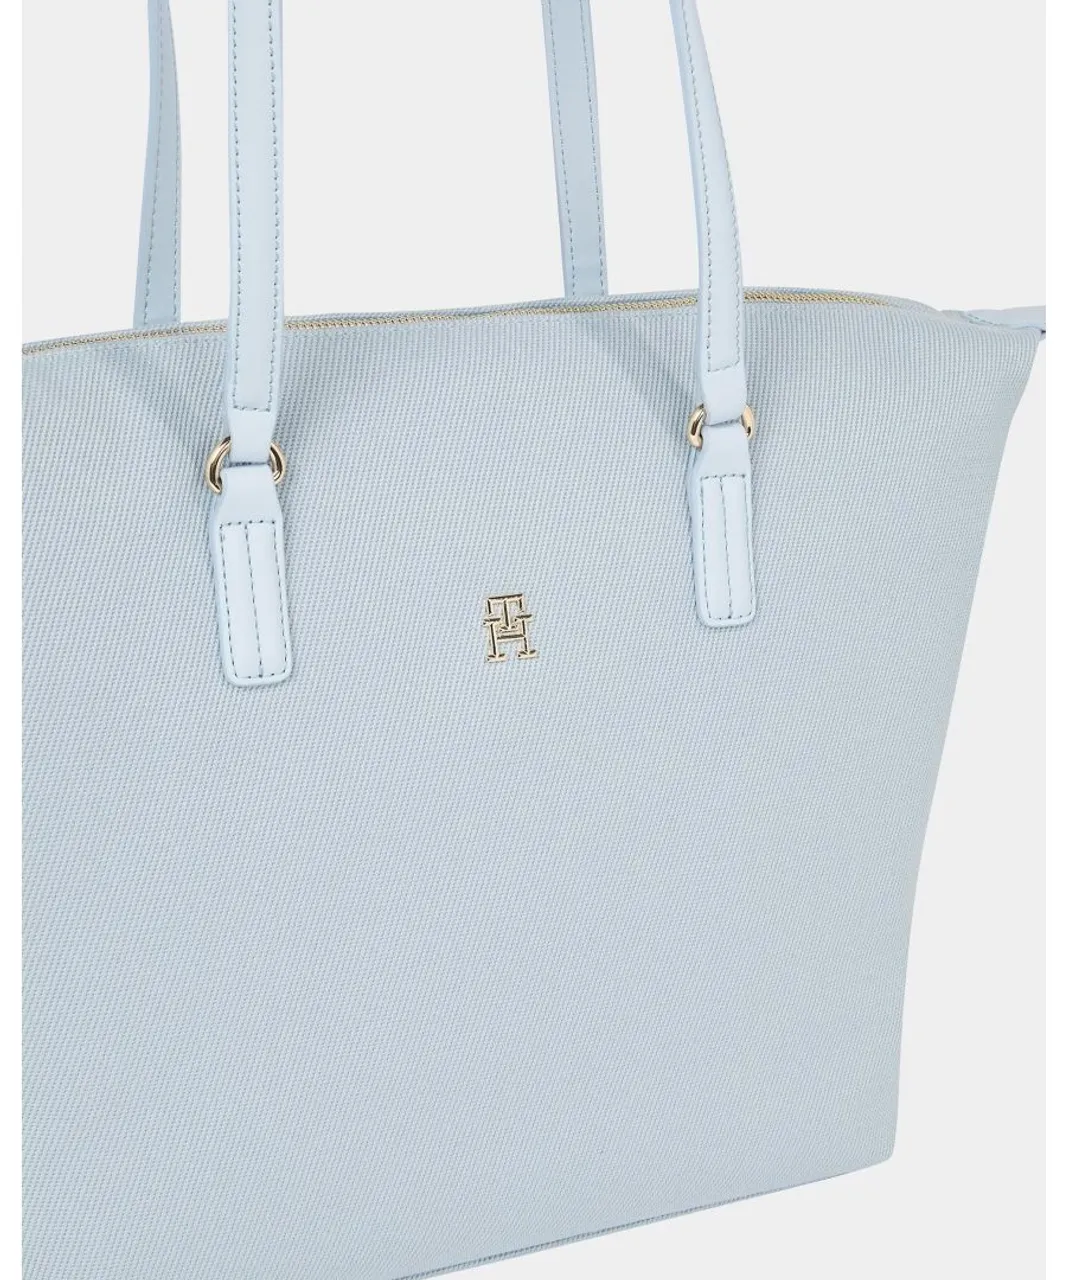 Tommy Hilfiger Poppy Womens Canvas Tote Bag - Blue - One Size